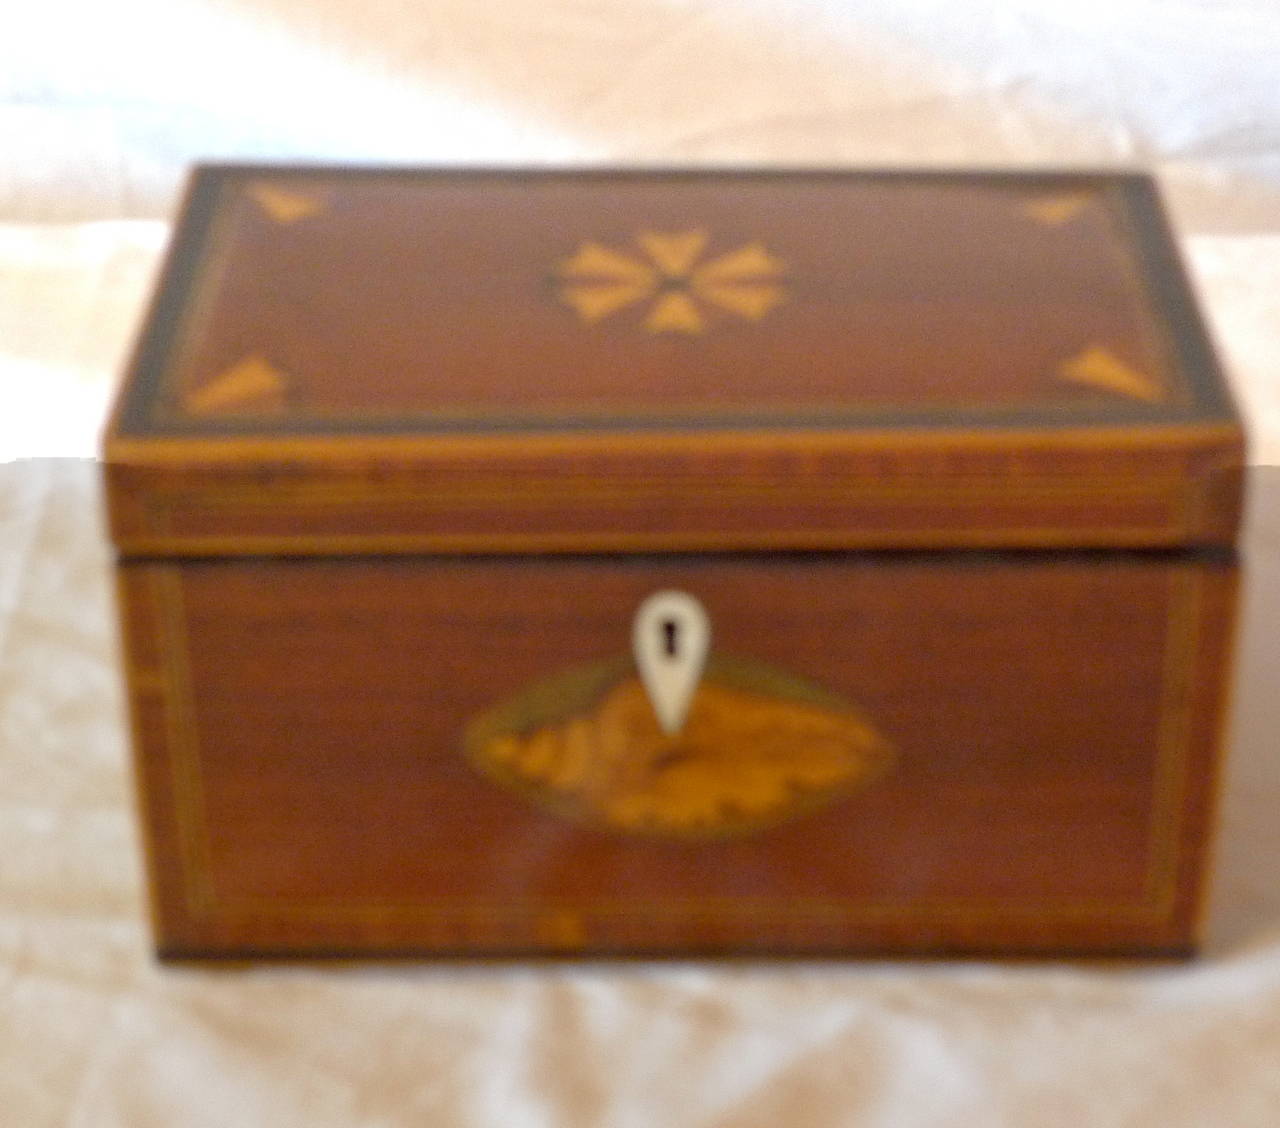 English 19th century rosewood tea-caddy, shell inlay and ivory embellishment.